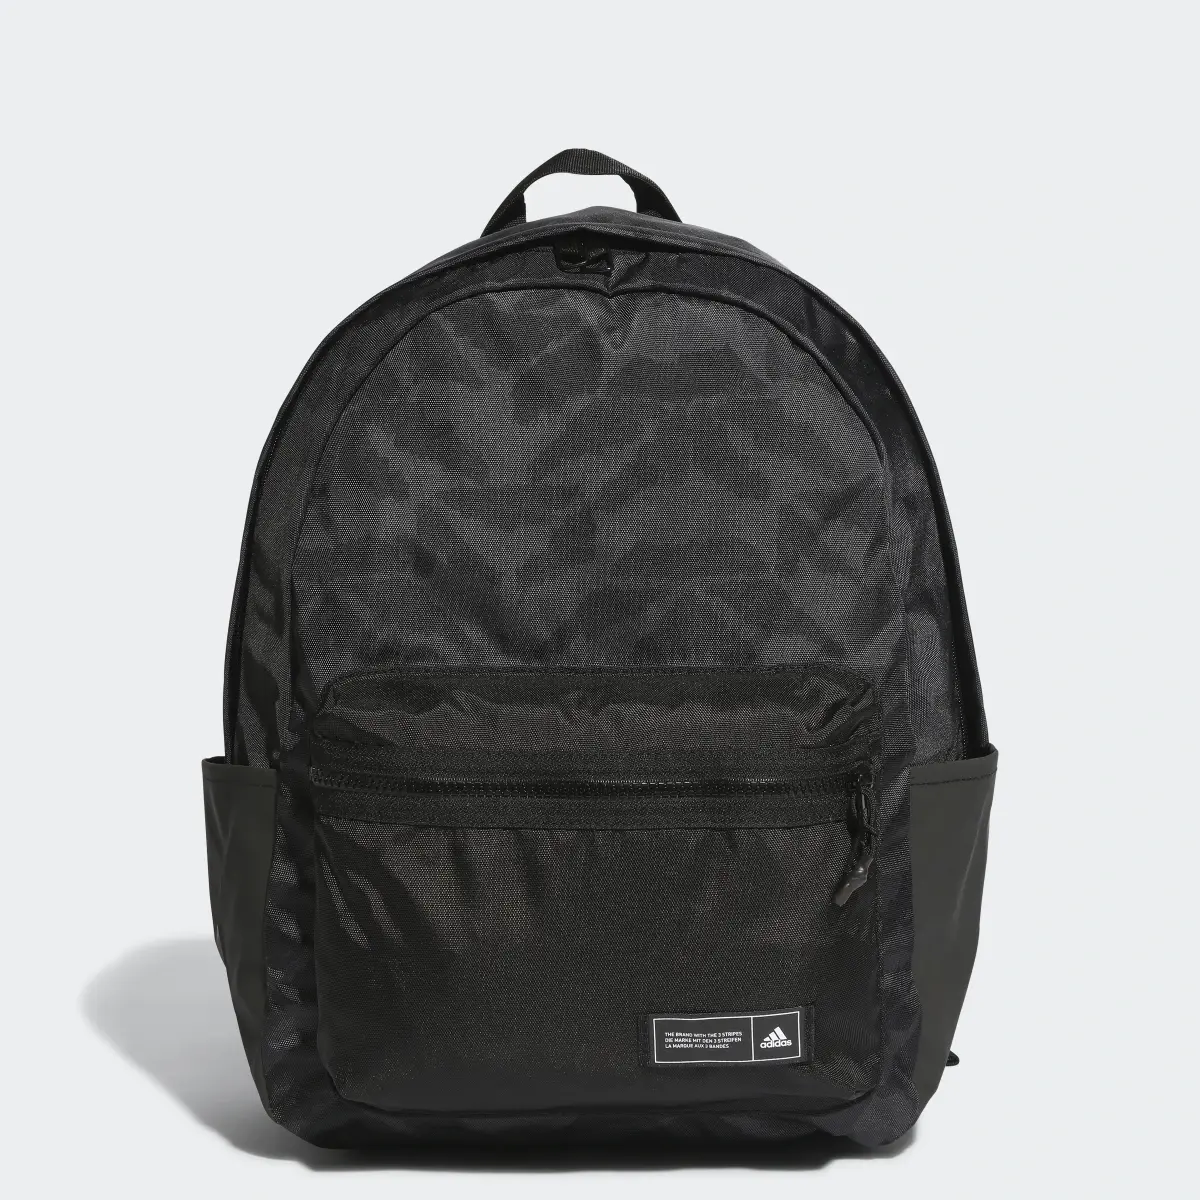 Adidas Back to School Badge of Sport Backpack. 1